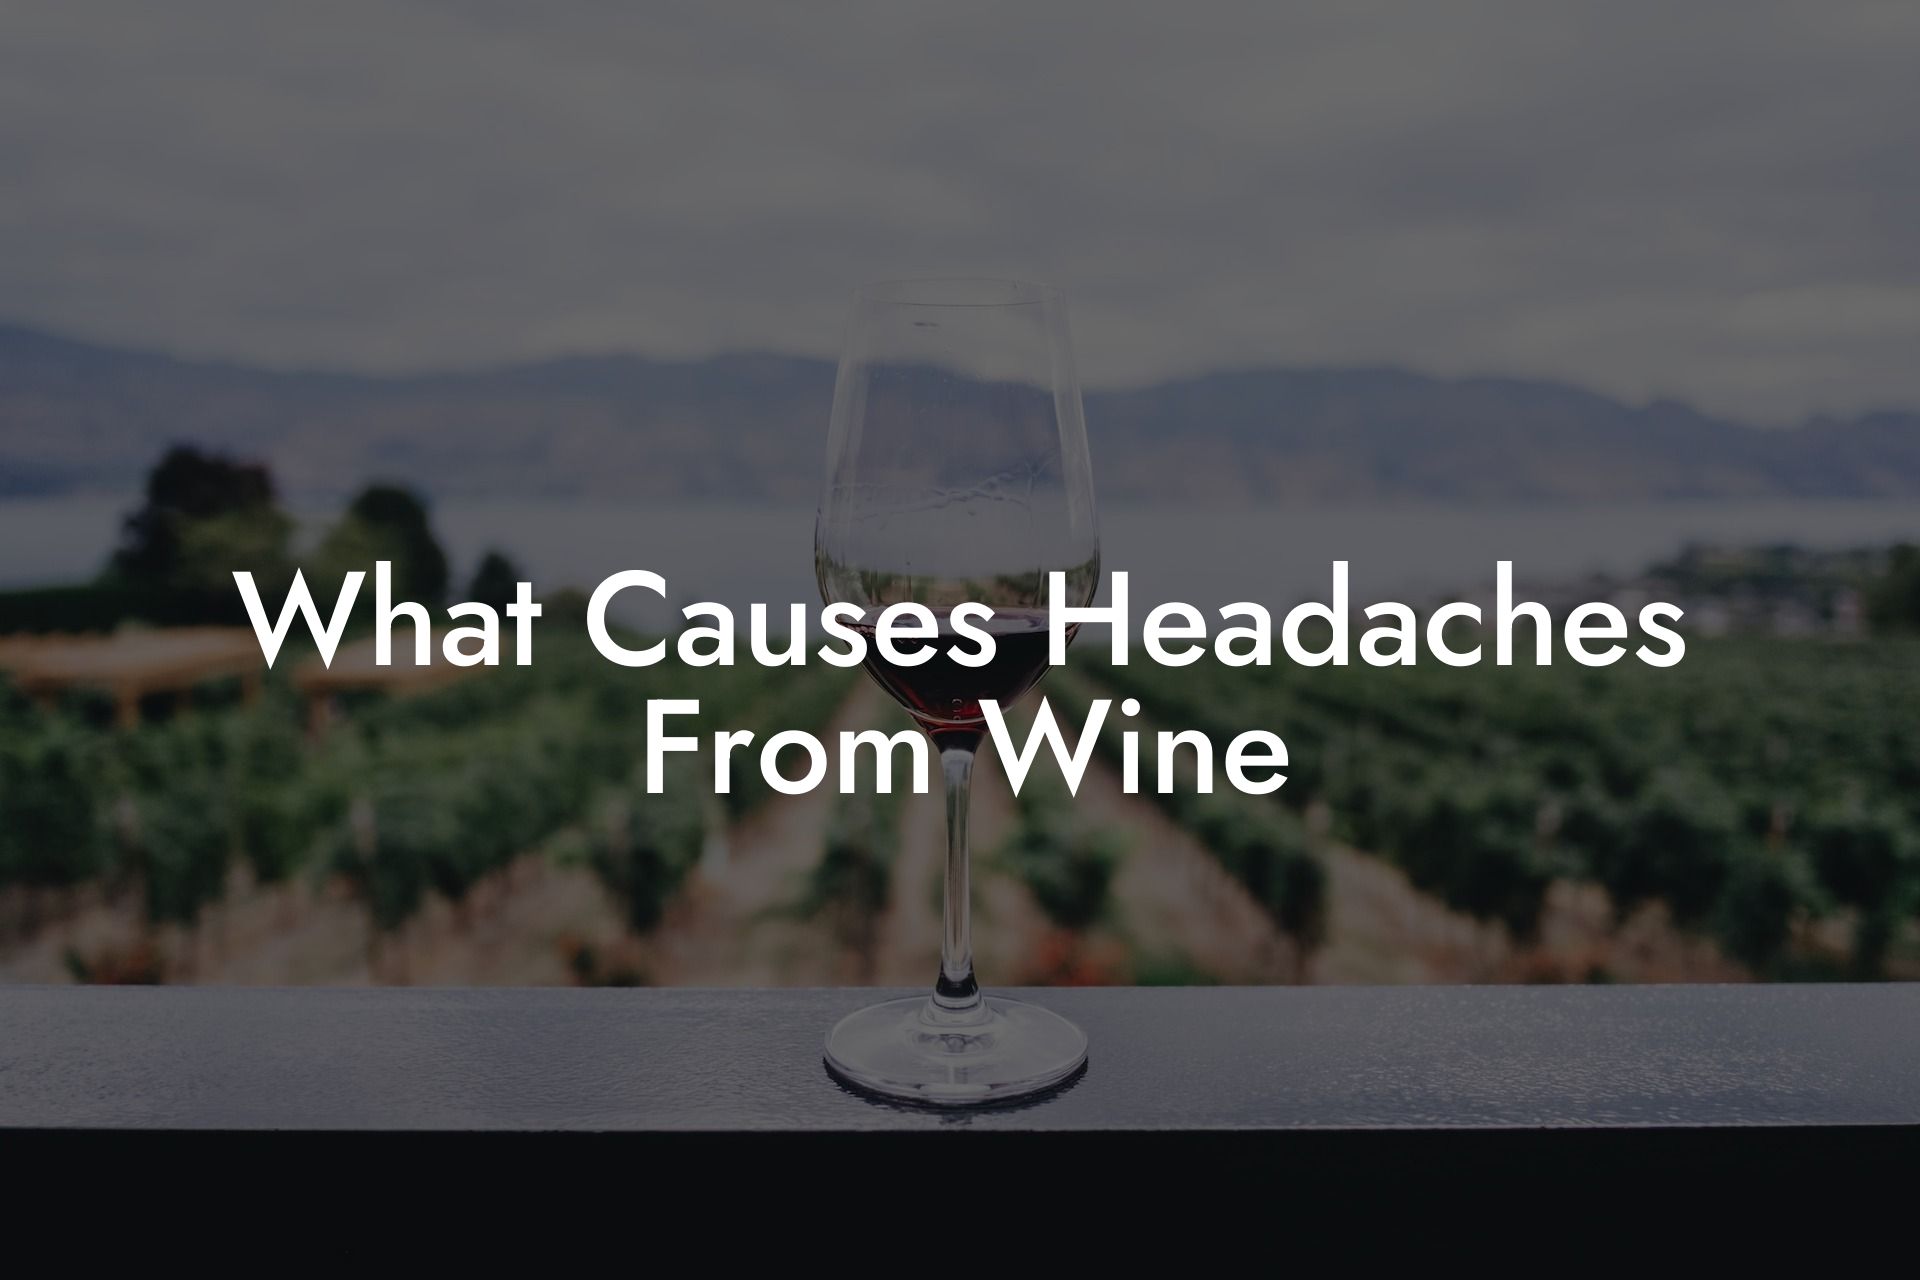 What Causes Headaches From Wine